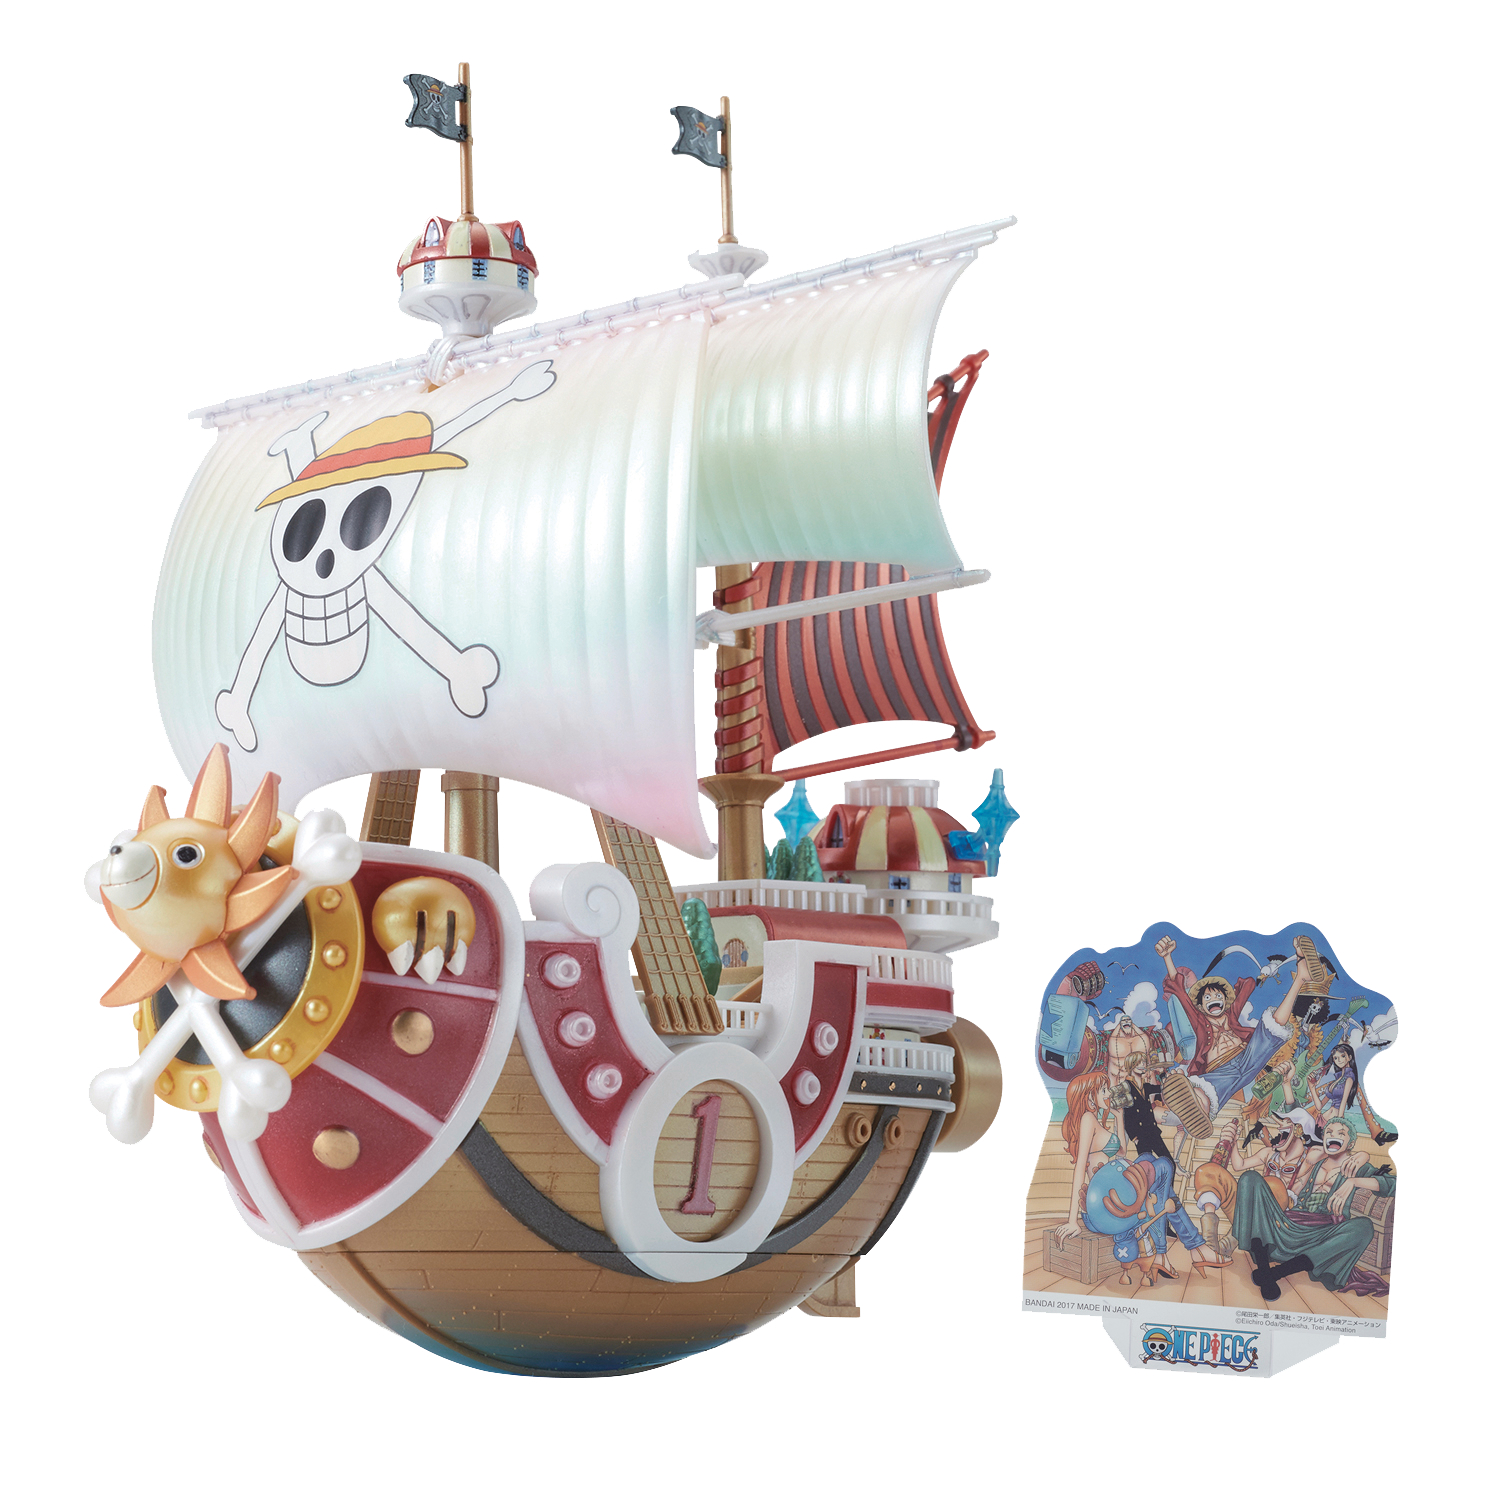 JUL178910 - ONE PIECE THOUSAND SUNNY GRAND SHIP MDL COLL MEMORIAL VER